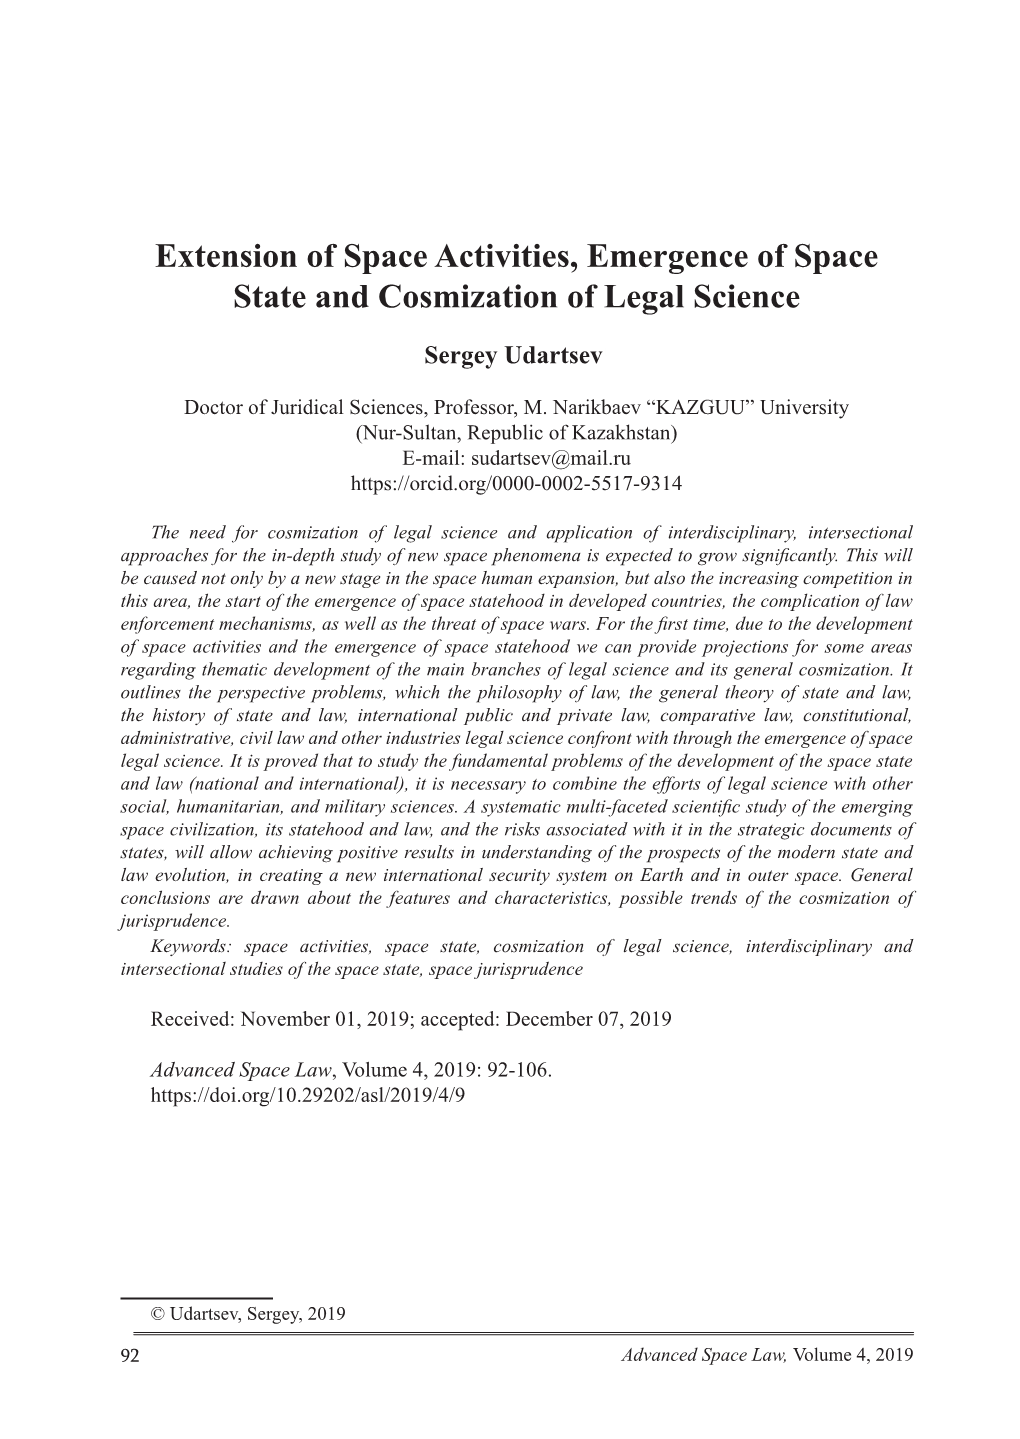 Extension of Space Activities, Emergence of Space State and Cosmization of Legal Science